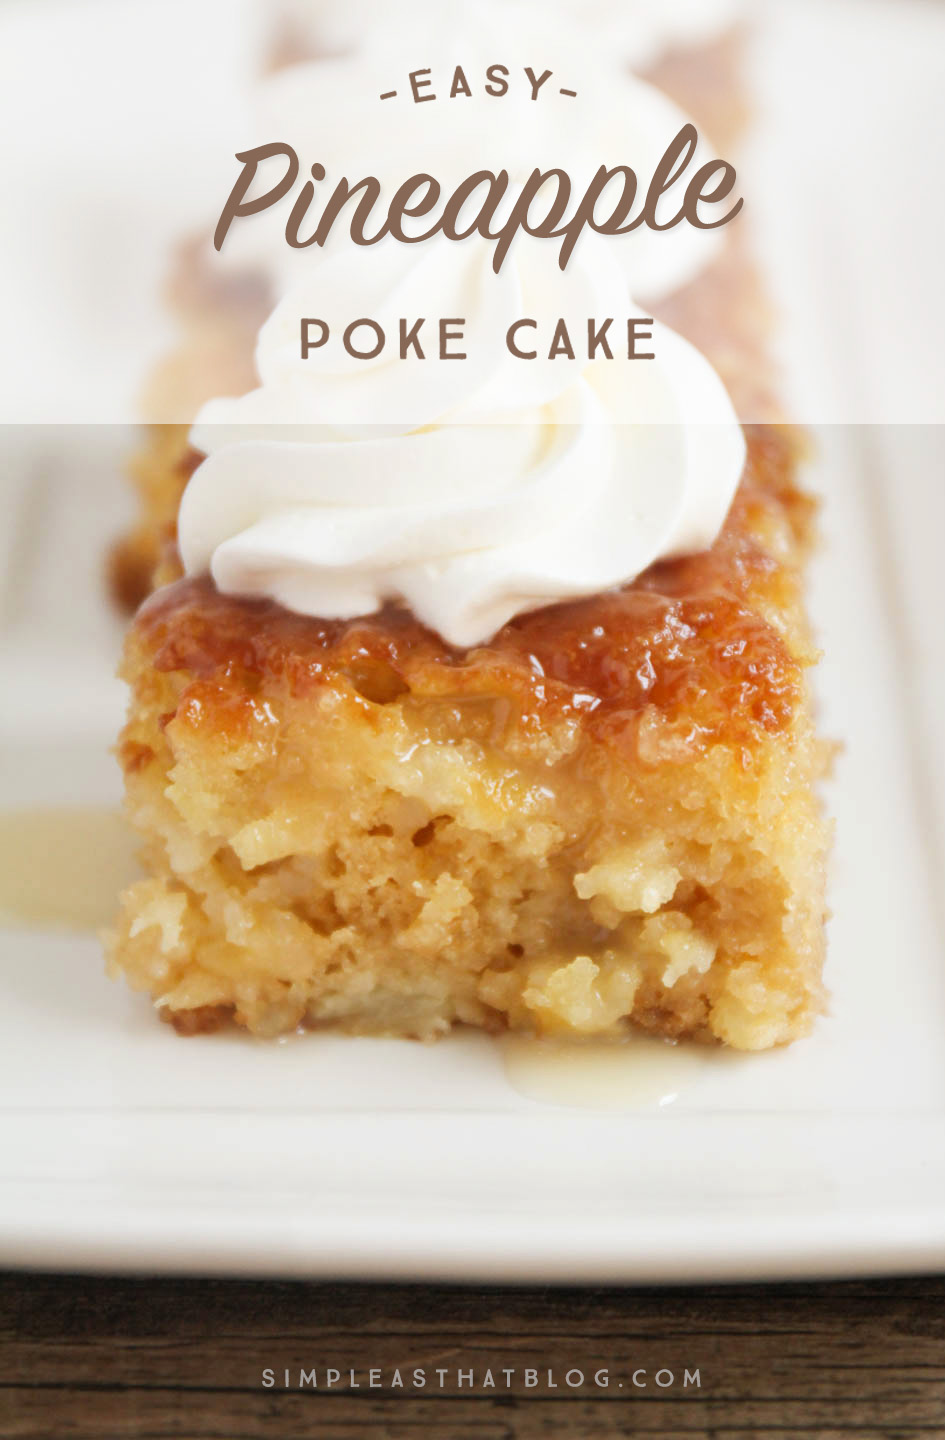 This made from scratch Pineapple Poke Cake is as easy as using a mix and it turns out spongey, moist and delicious every time! It's all the flavors of pineapple upside down cake, made simple and it's sure to be a crowd pleaser!